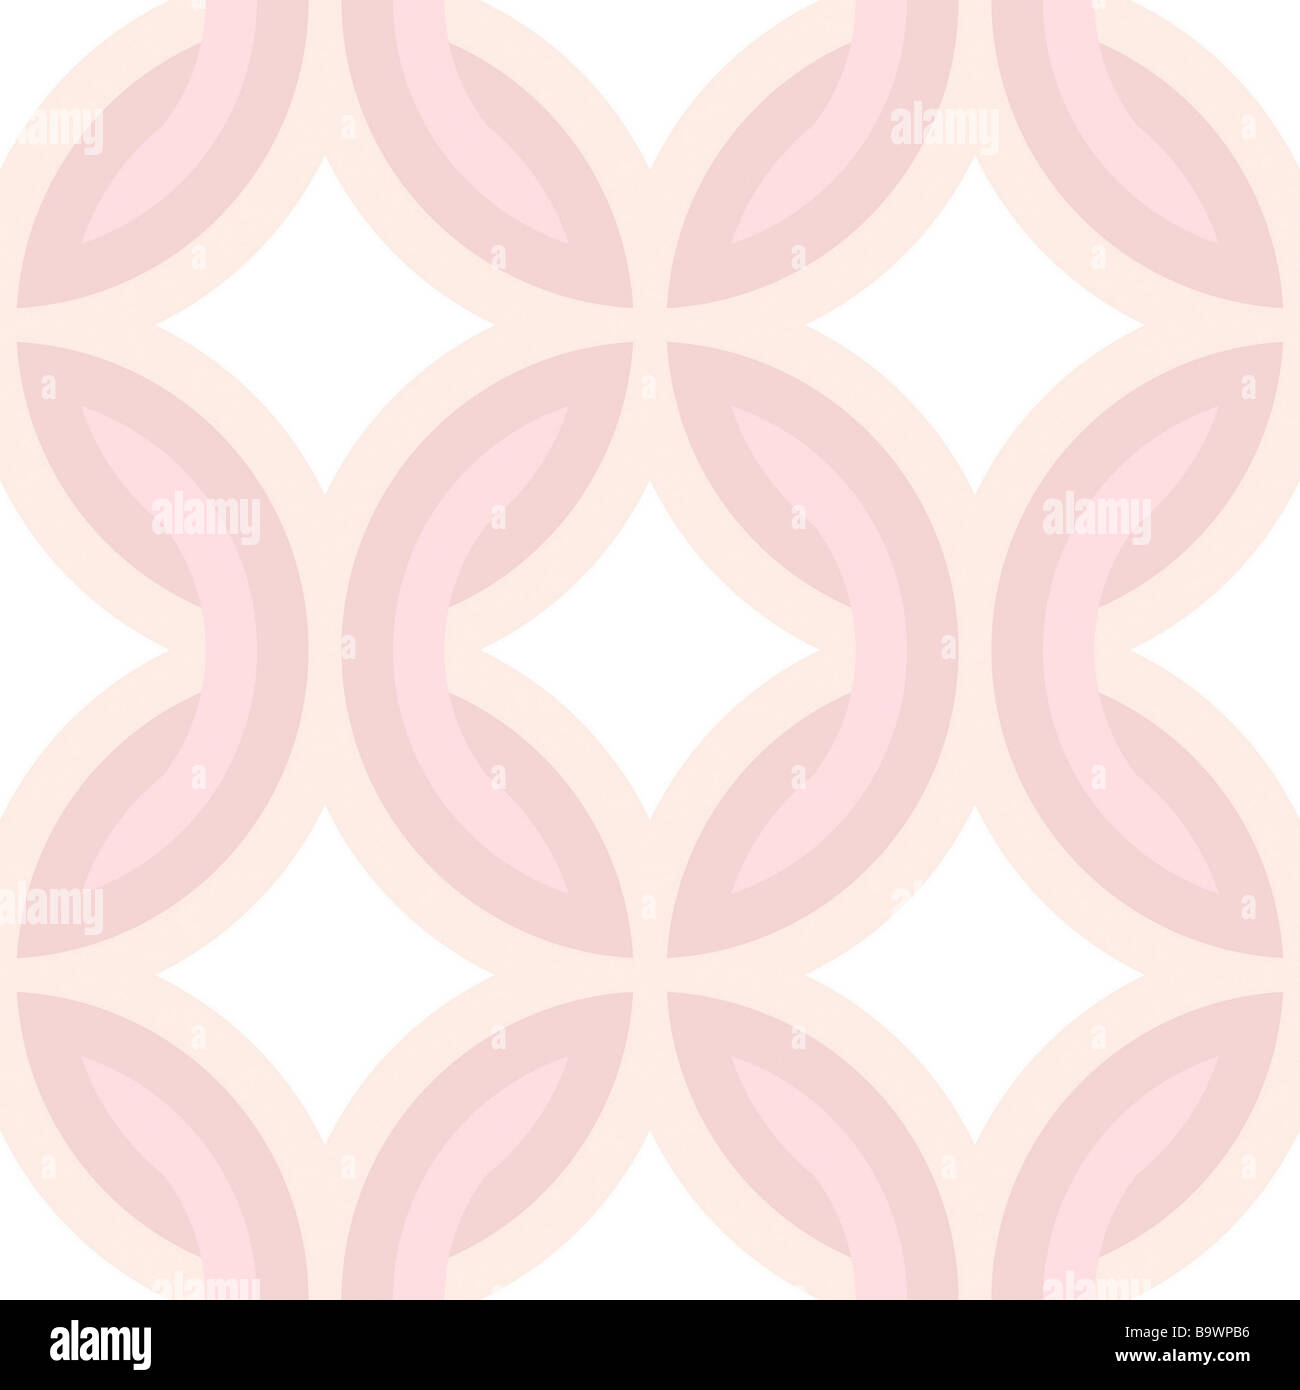 Colorful abstract retro patterns geometric design wallpaper background Stock Photo